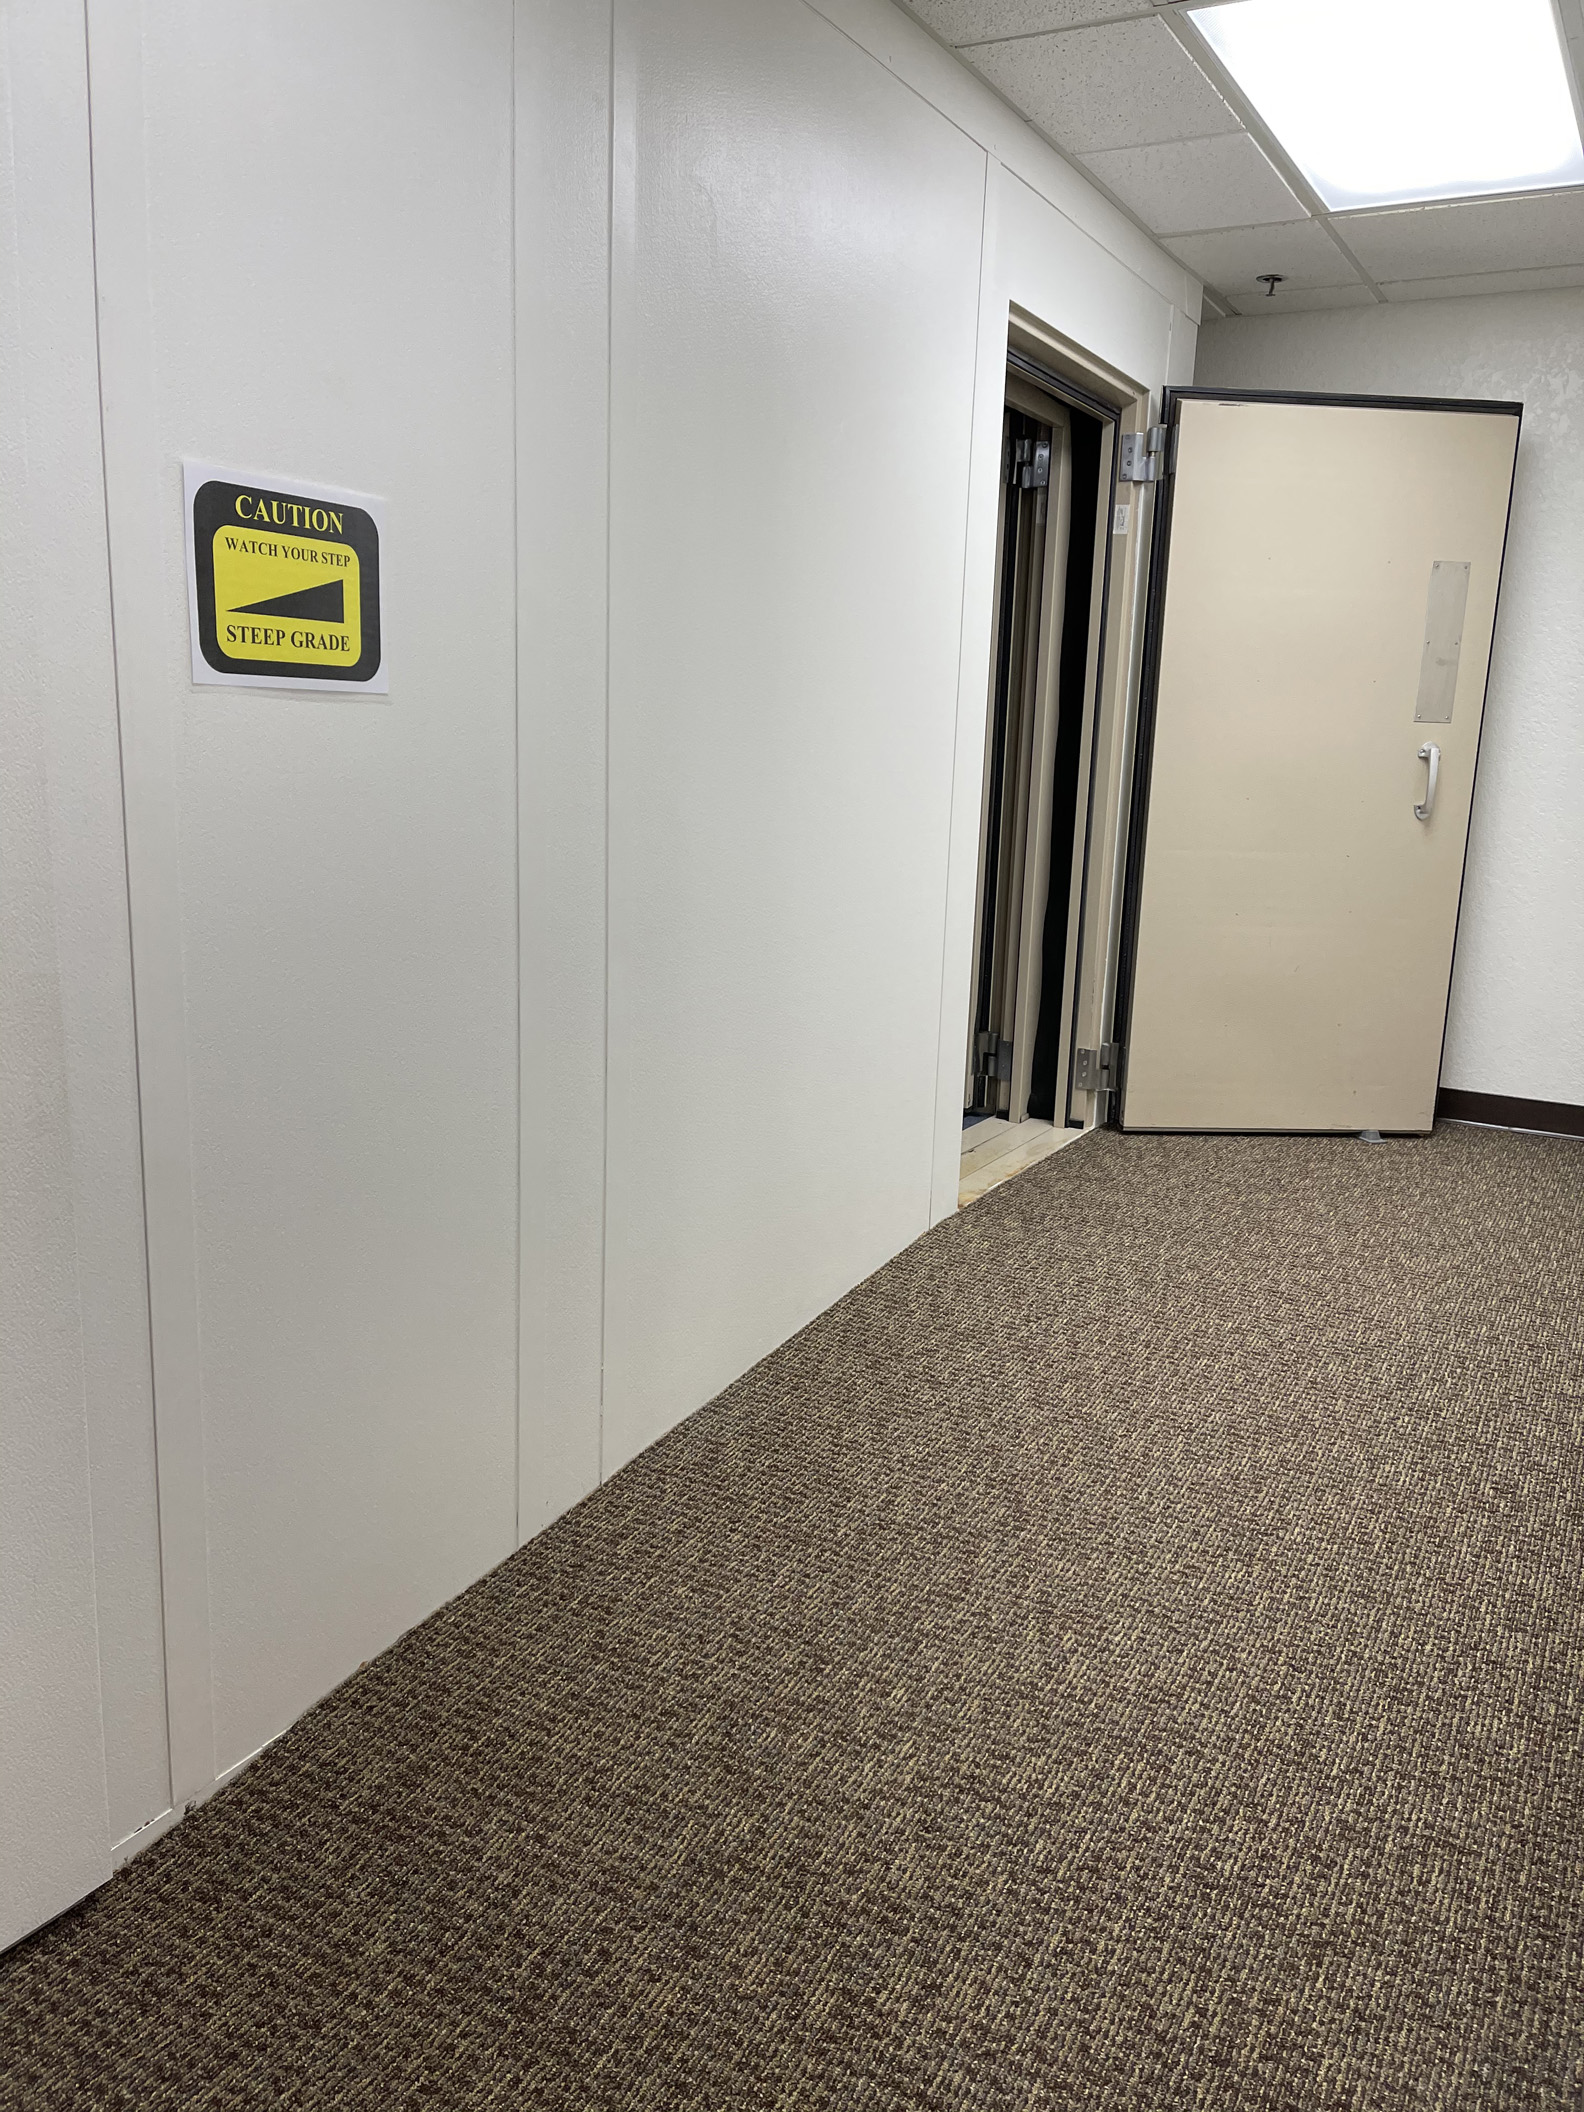 Our soundbooth is handicap accessible for walkers and wheelchairs.